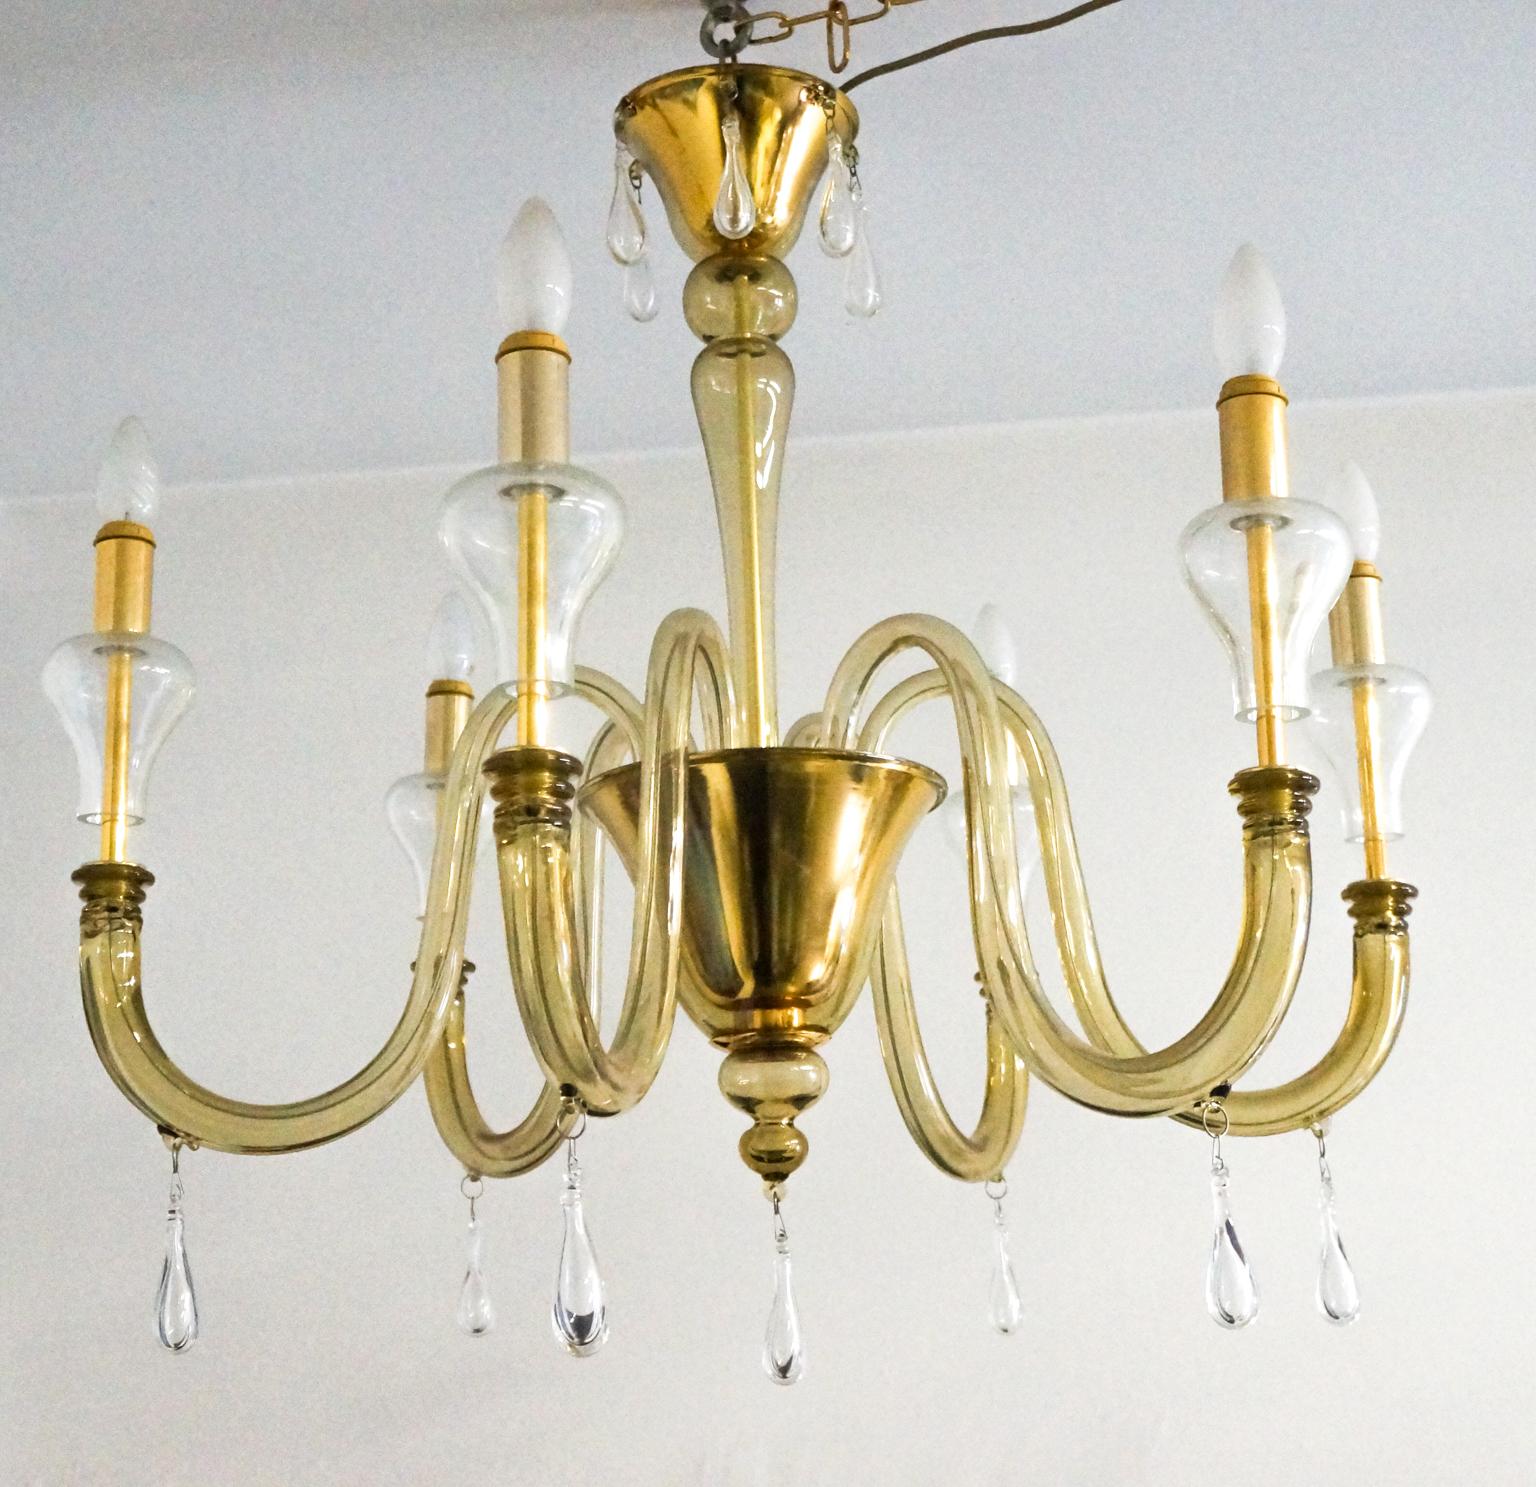 Elegant Venetian glass chandelier with six lights color smoked and crystal.
This fantastic chandelier with a golden finish.
Attributed to Venini and executed in the circa 1970s.

The Murano glass chandelier is nothing like a typical fixture made